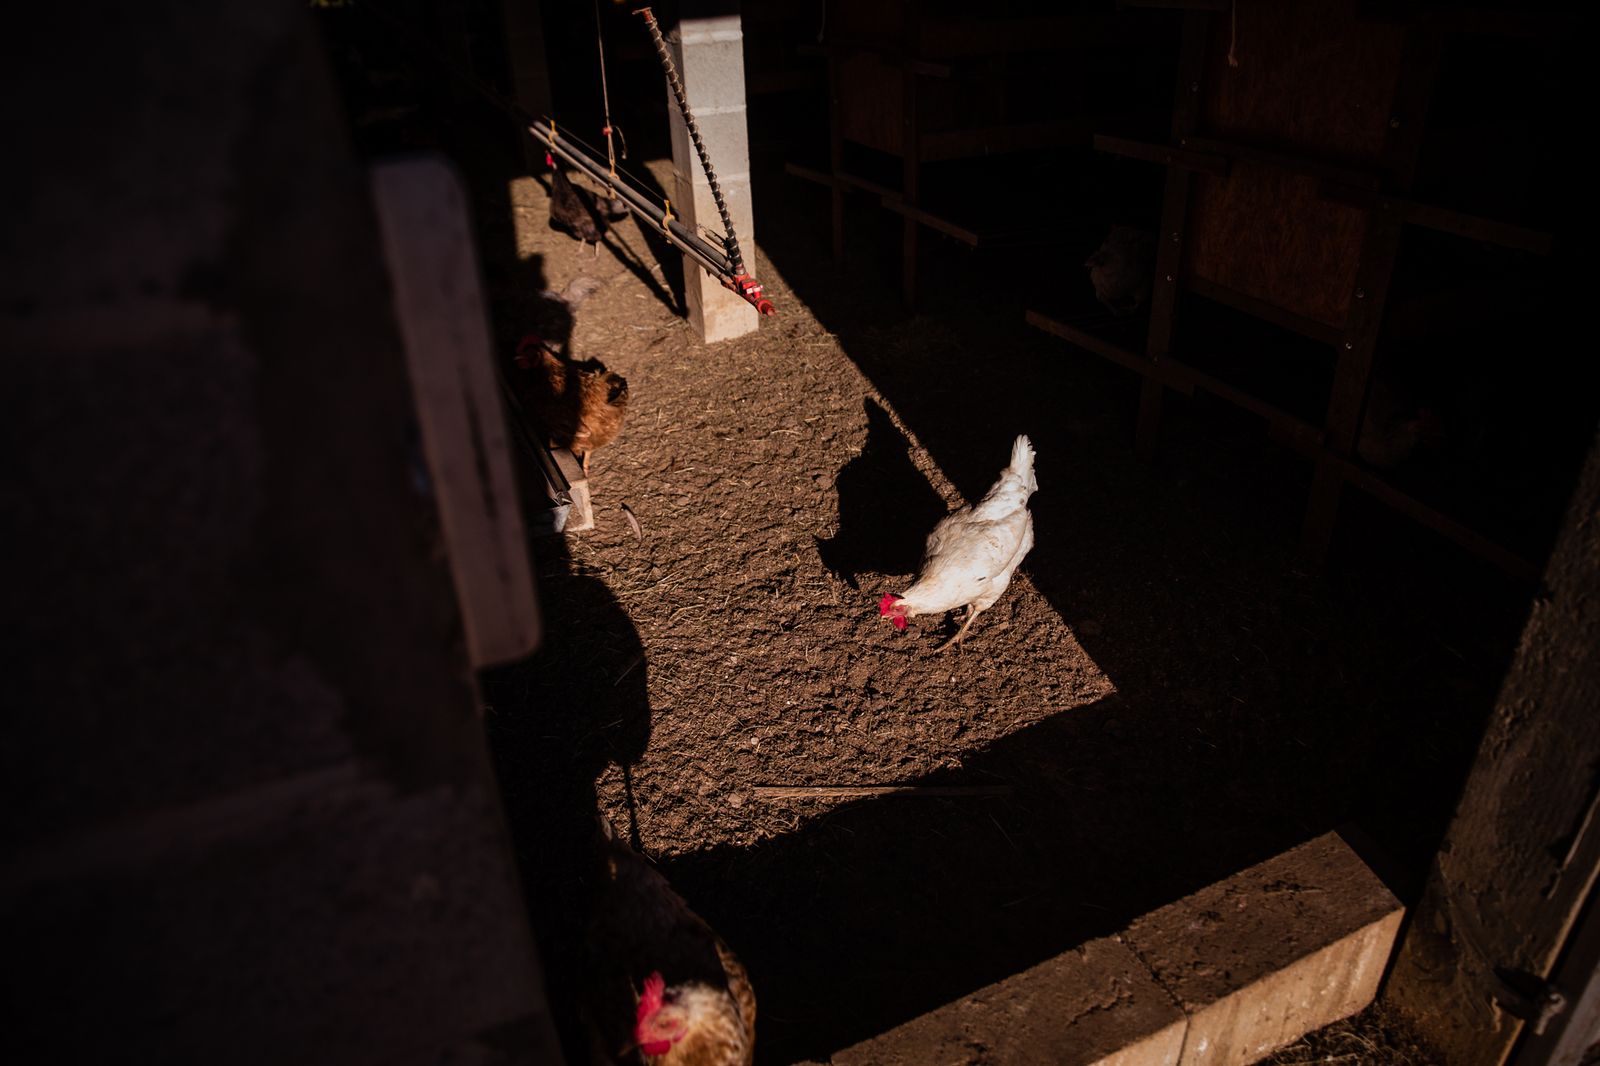 © Alinne Rezende - Image from the Life of a chicken farm during the Covid-19 pandemic in Brazil photography project